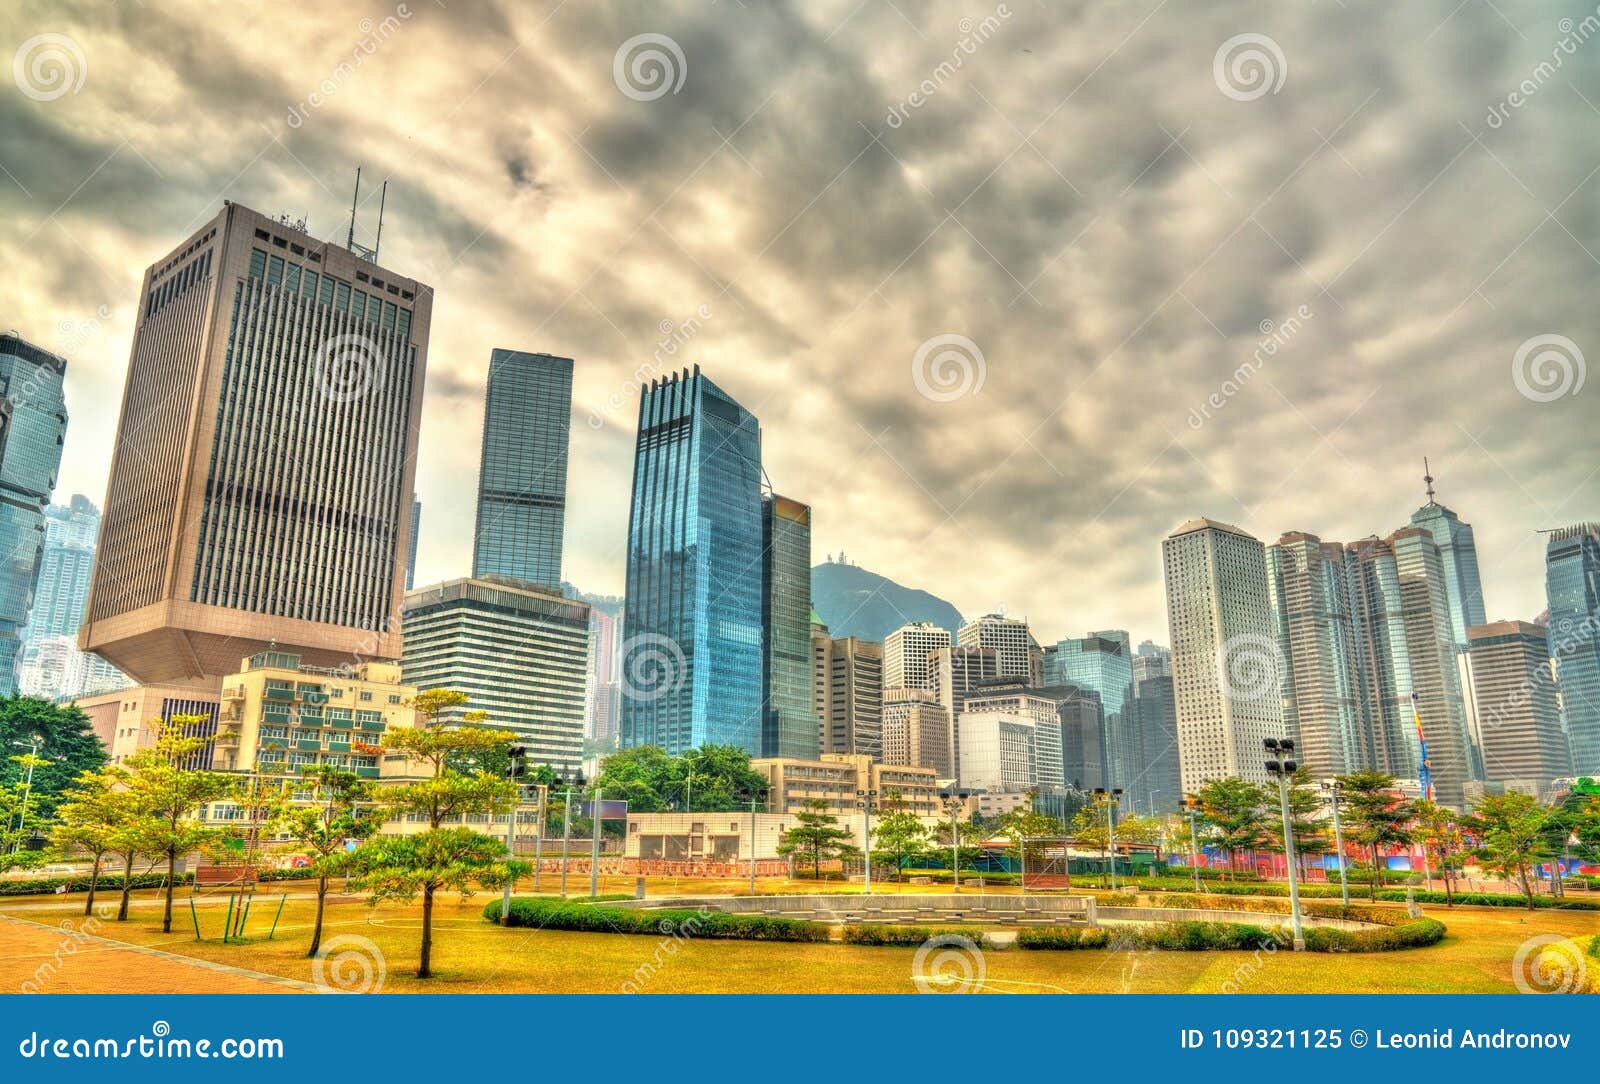 View Of The Central Business District Of Hong Kong Stock Image Image